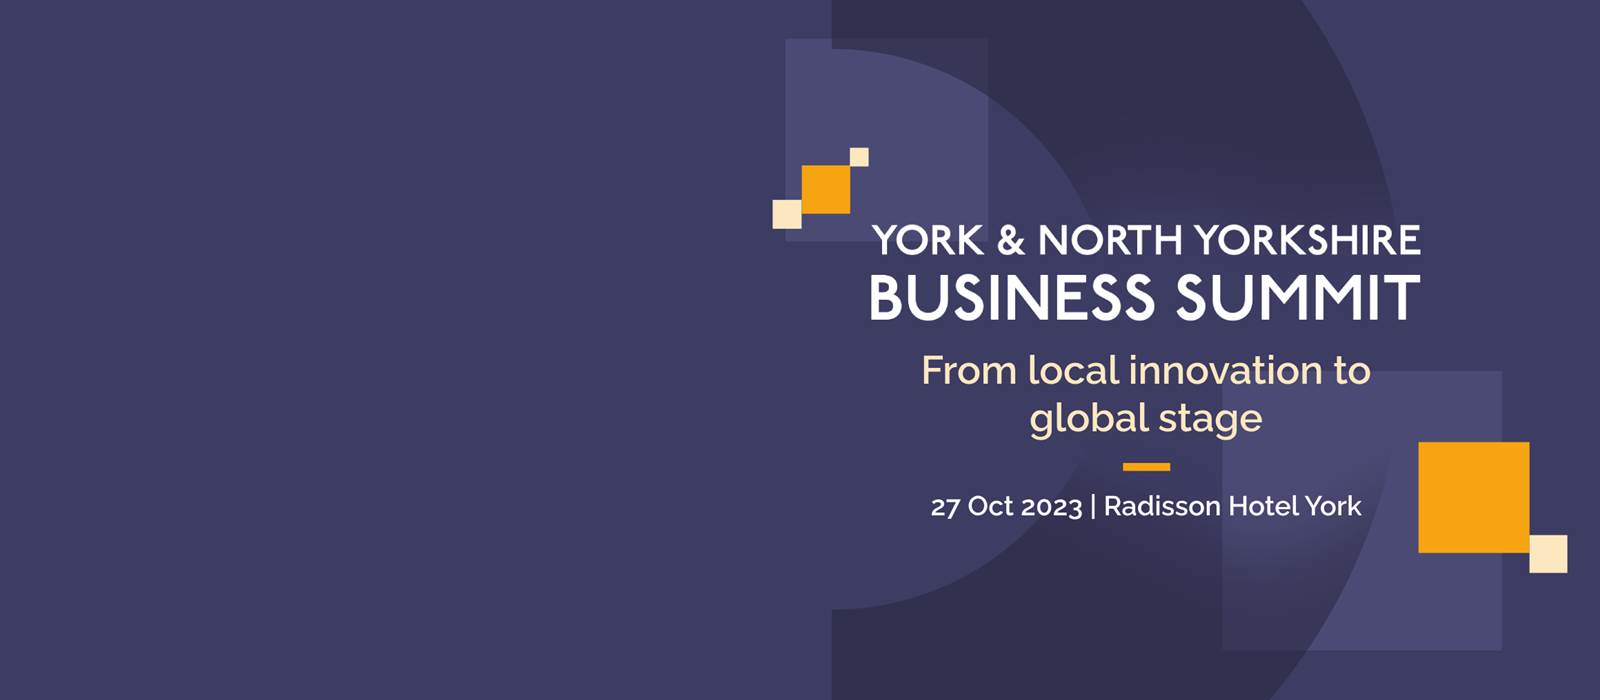 Join us at the York & North Yorkshire Business Summit